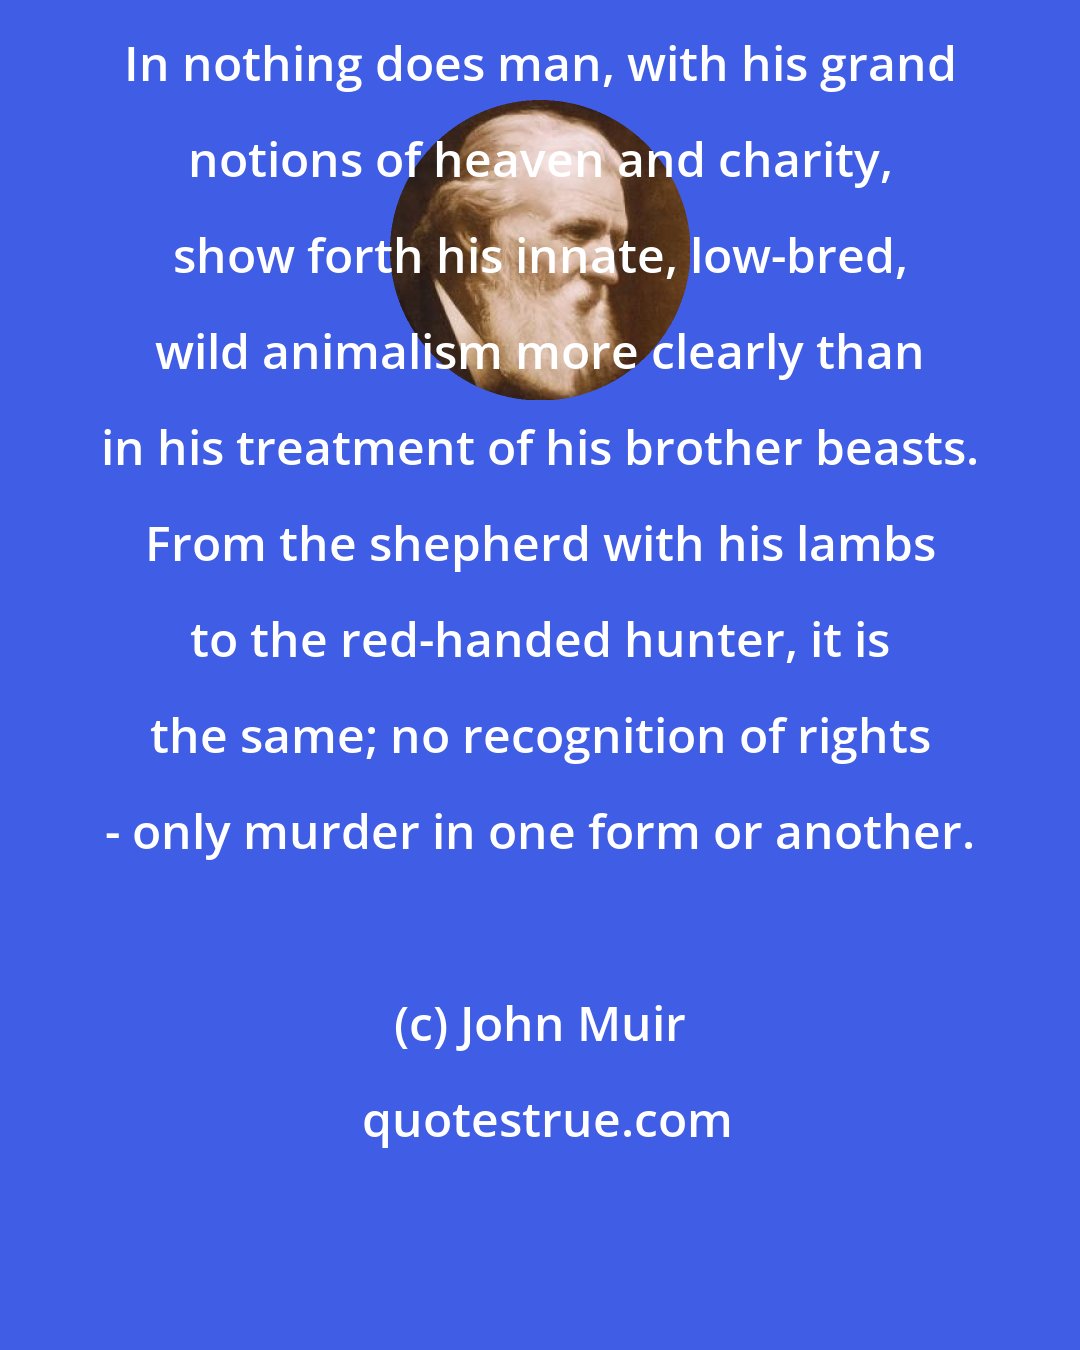 John Muir: In nothing does man, with his grand notions of heaven and charity, show forth his innate, low-bred, wild animalism more clearly than in his treatment of his brother beasts. From the shepherd with his lambs to the red-handed hunter, it is the same; no recognition of rights - only murder in one form or another.